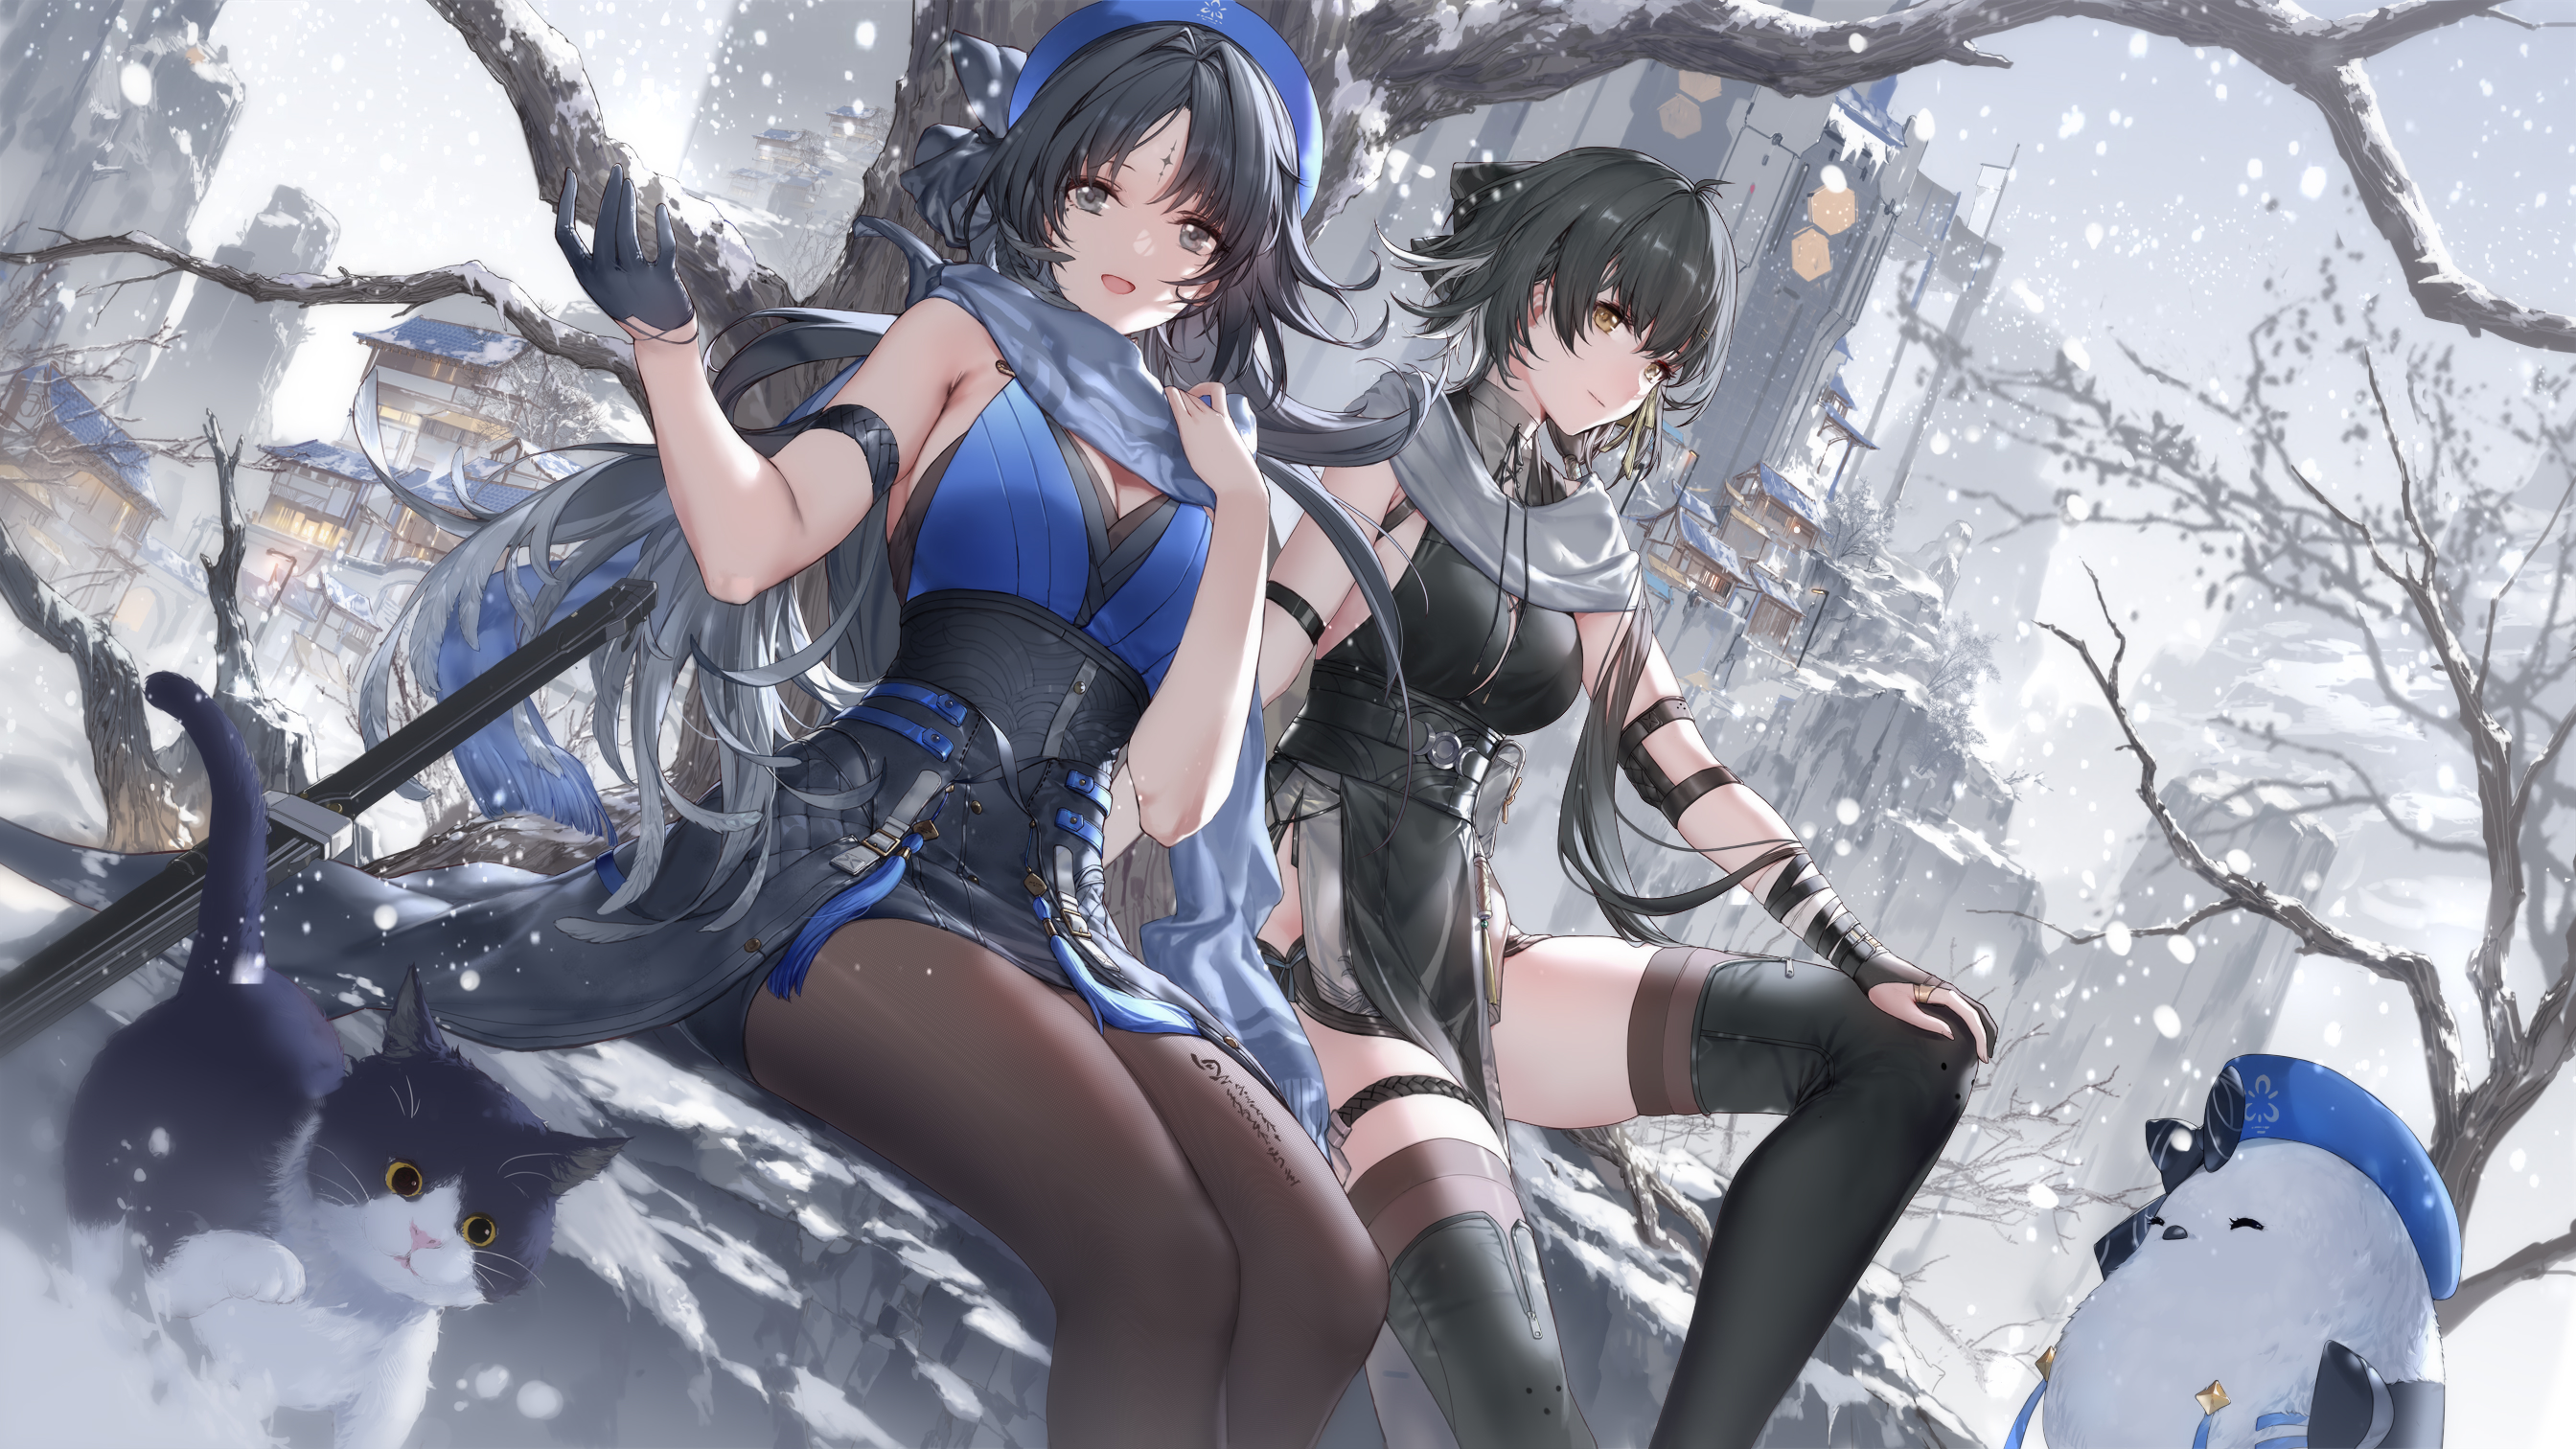 Anime 2688x1512 Wuthering Waves sitting Yangyang (Wuthering Waves) Female Rover (Wuthering Waves) two women long hair thigh-highs black dress blue dress snowing Swd3e2 animals snow trees gloves anime girls